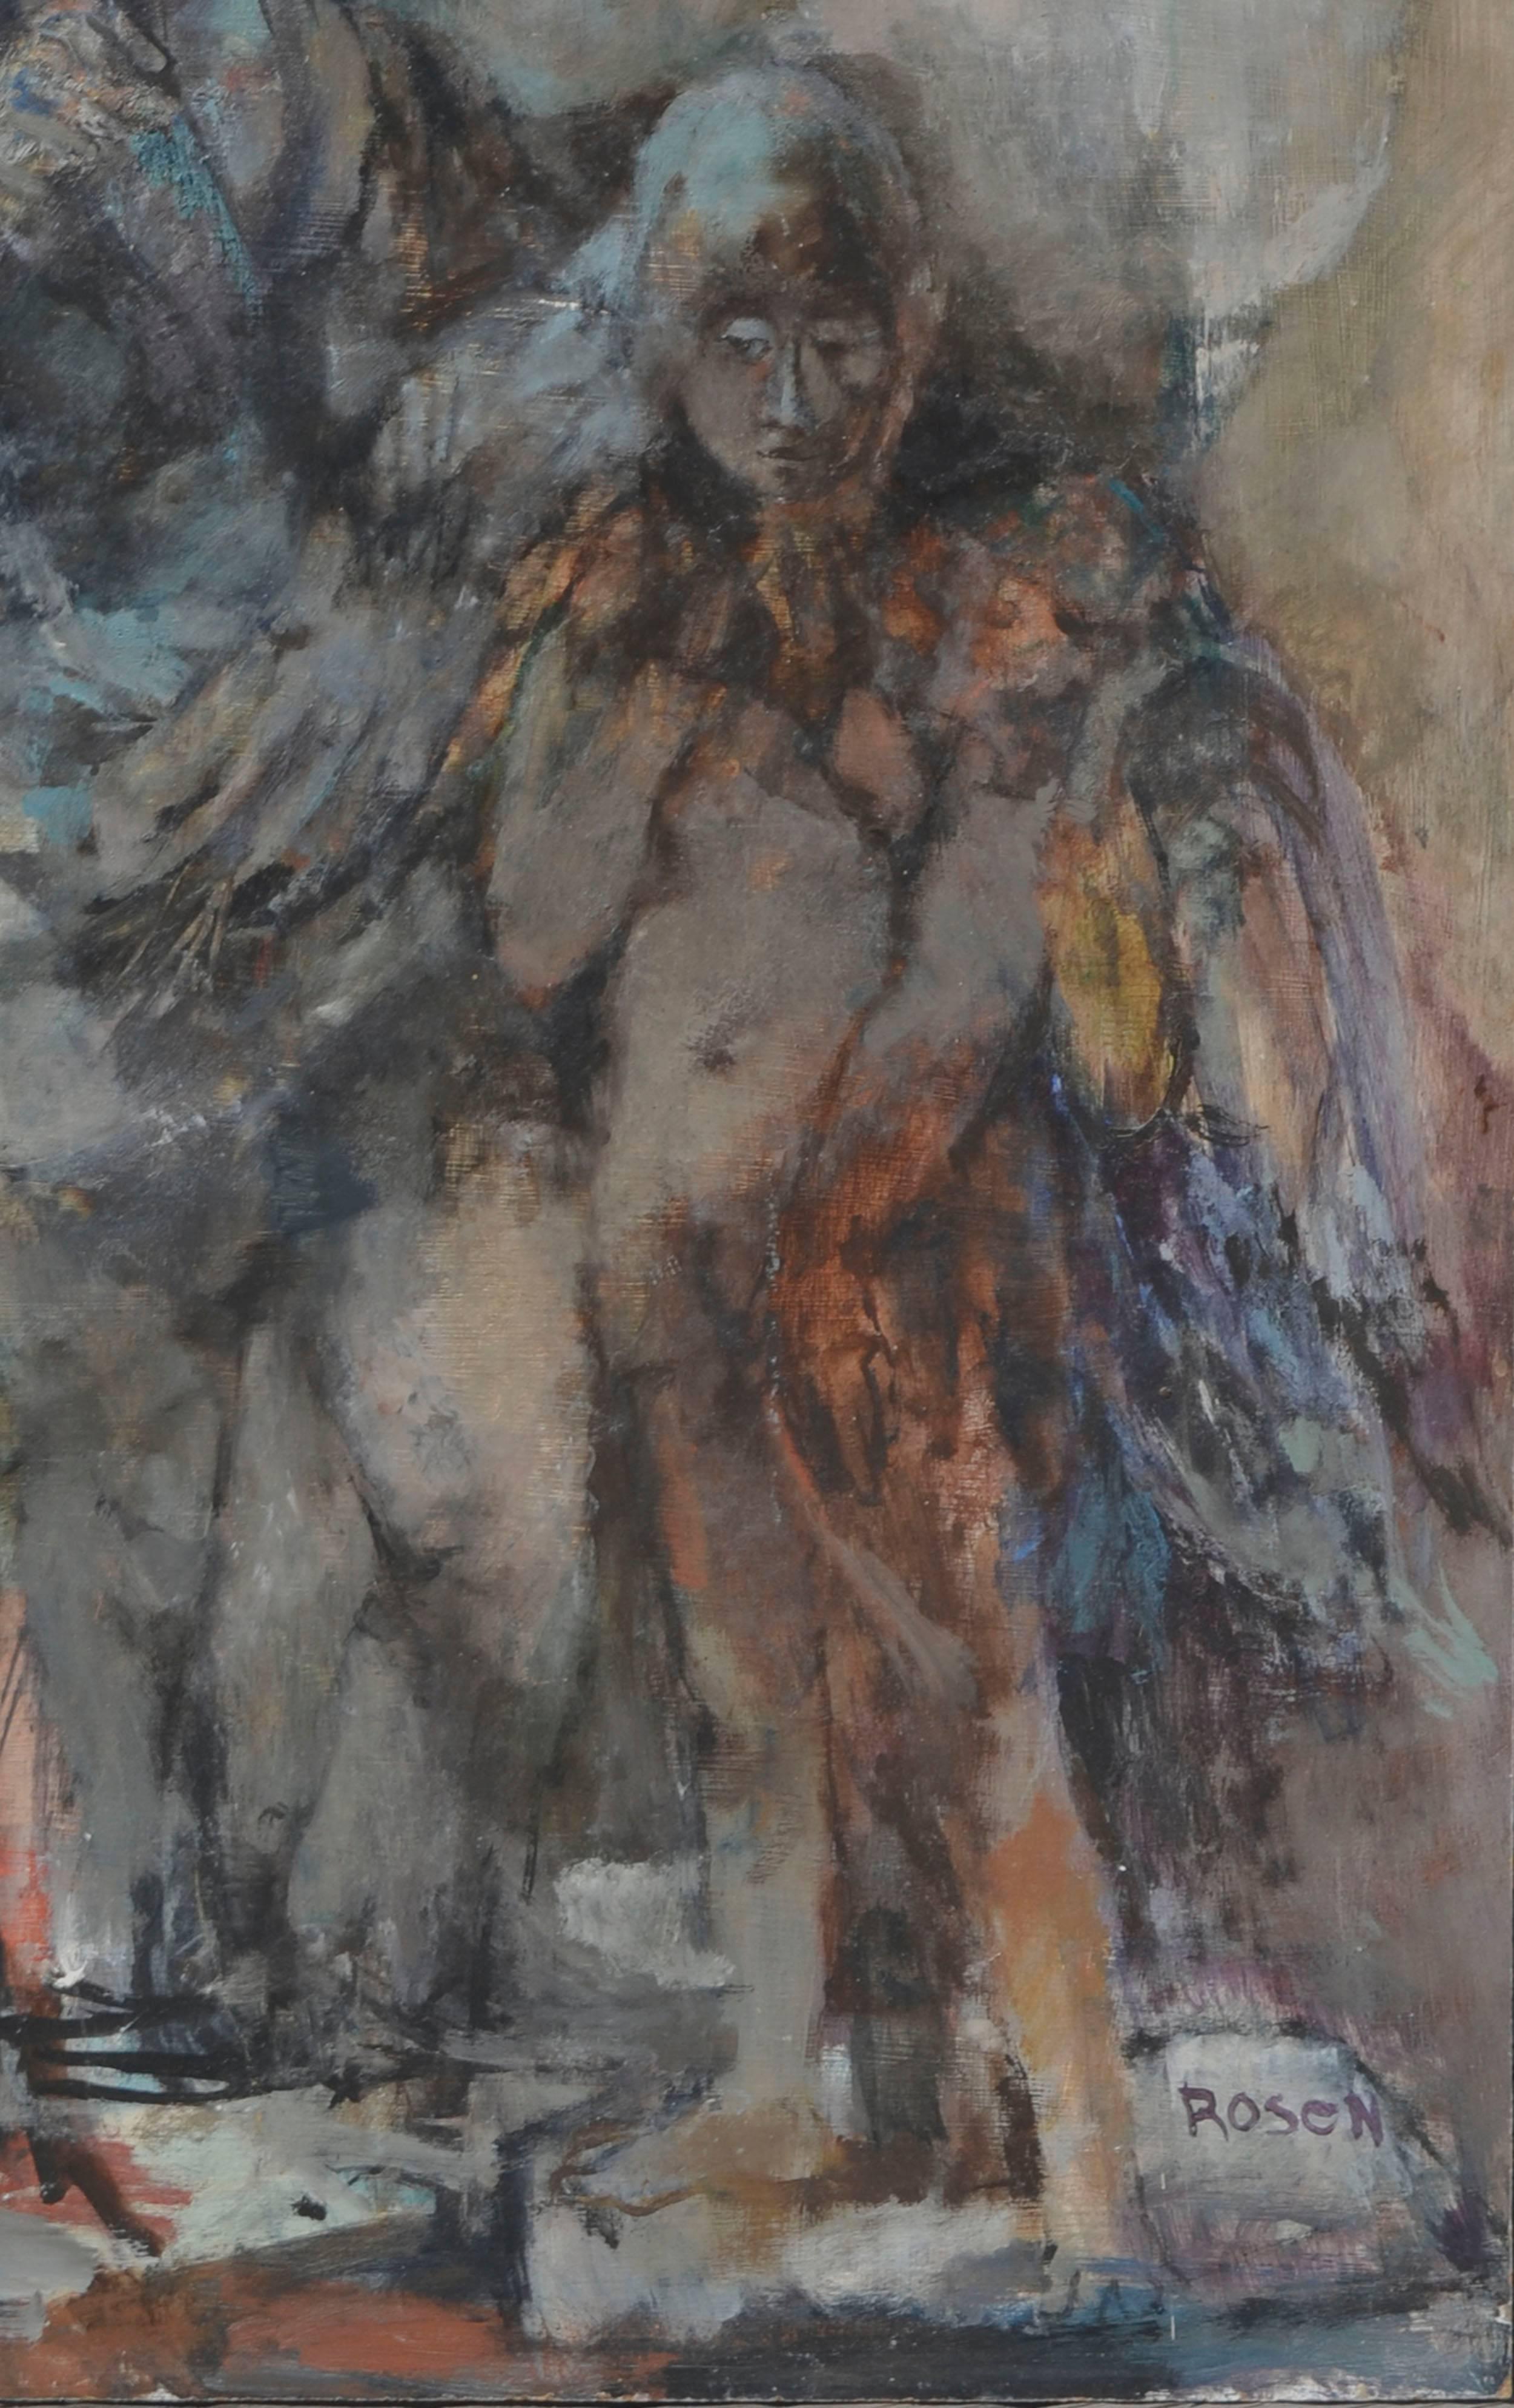 Victorian Couple with Angel - Figurative Abstract  - Painting by David Rosen (b.1912)